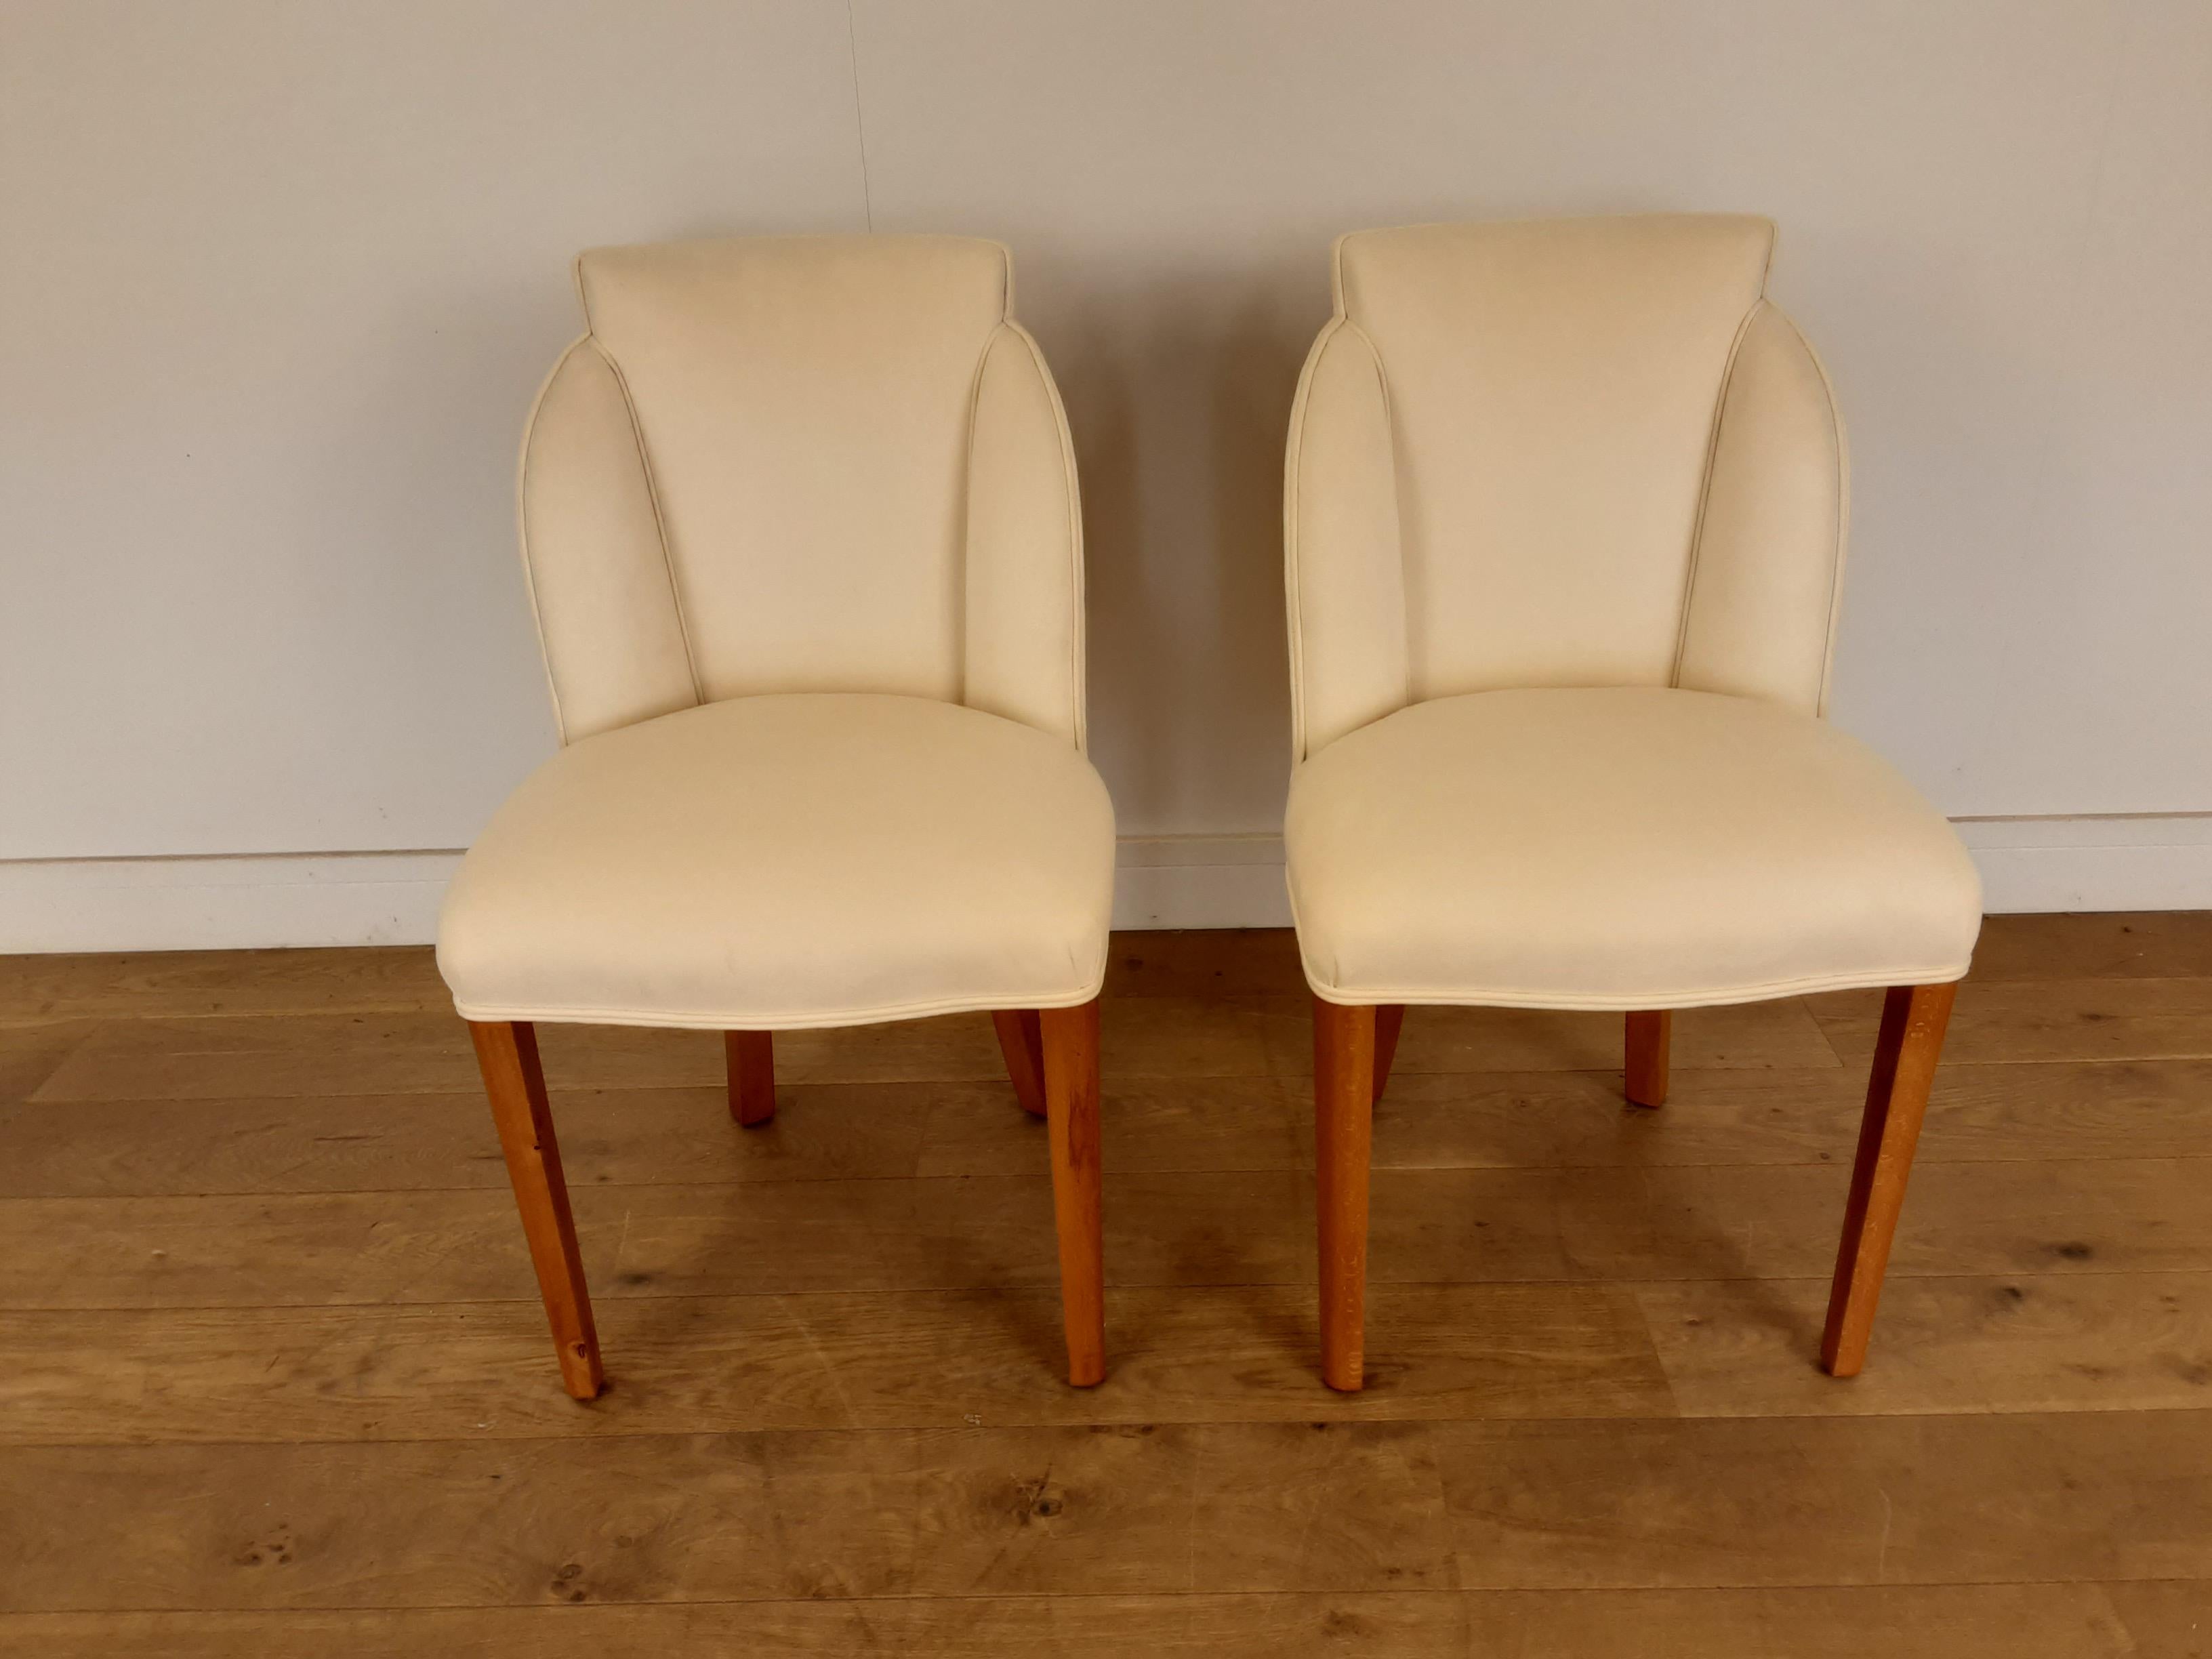 Pair of Art Deco Cloud Back Chairs in Walnut by Epstein, circa 1930 For Sale 7